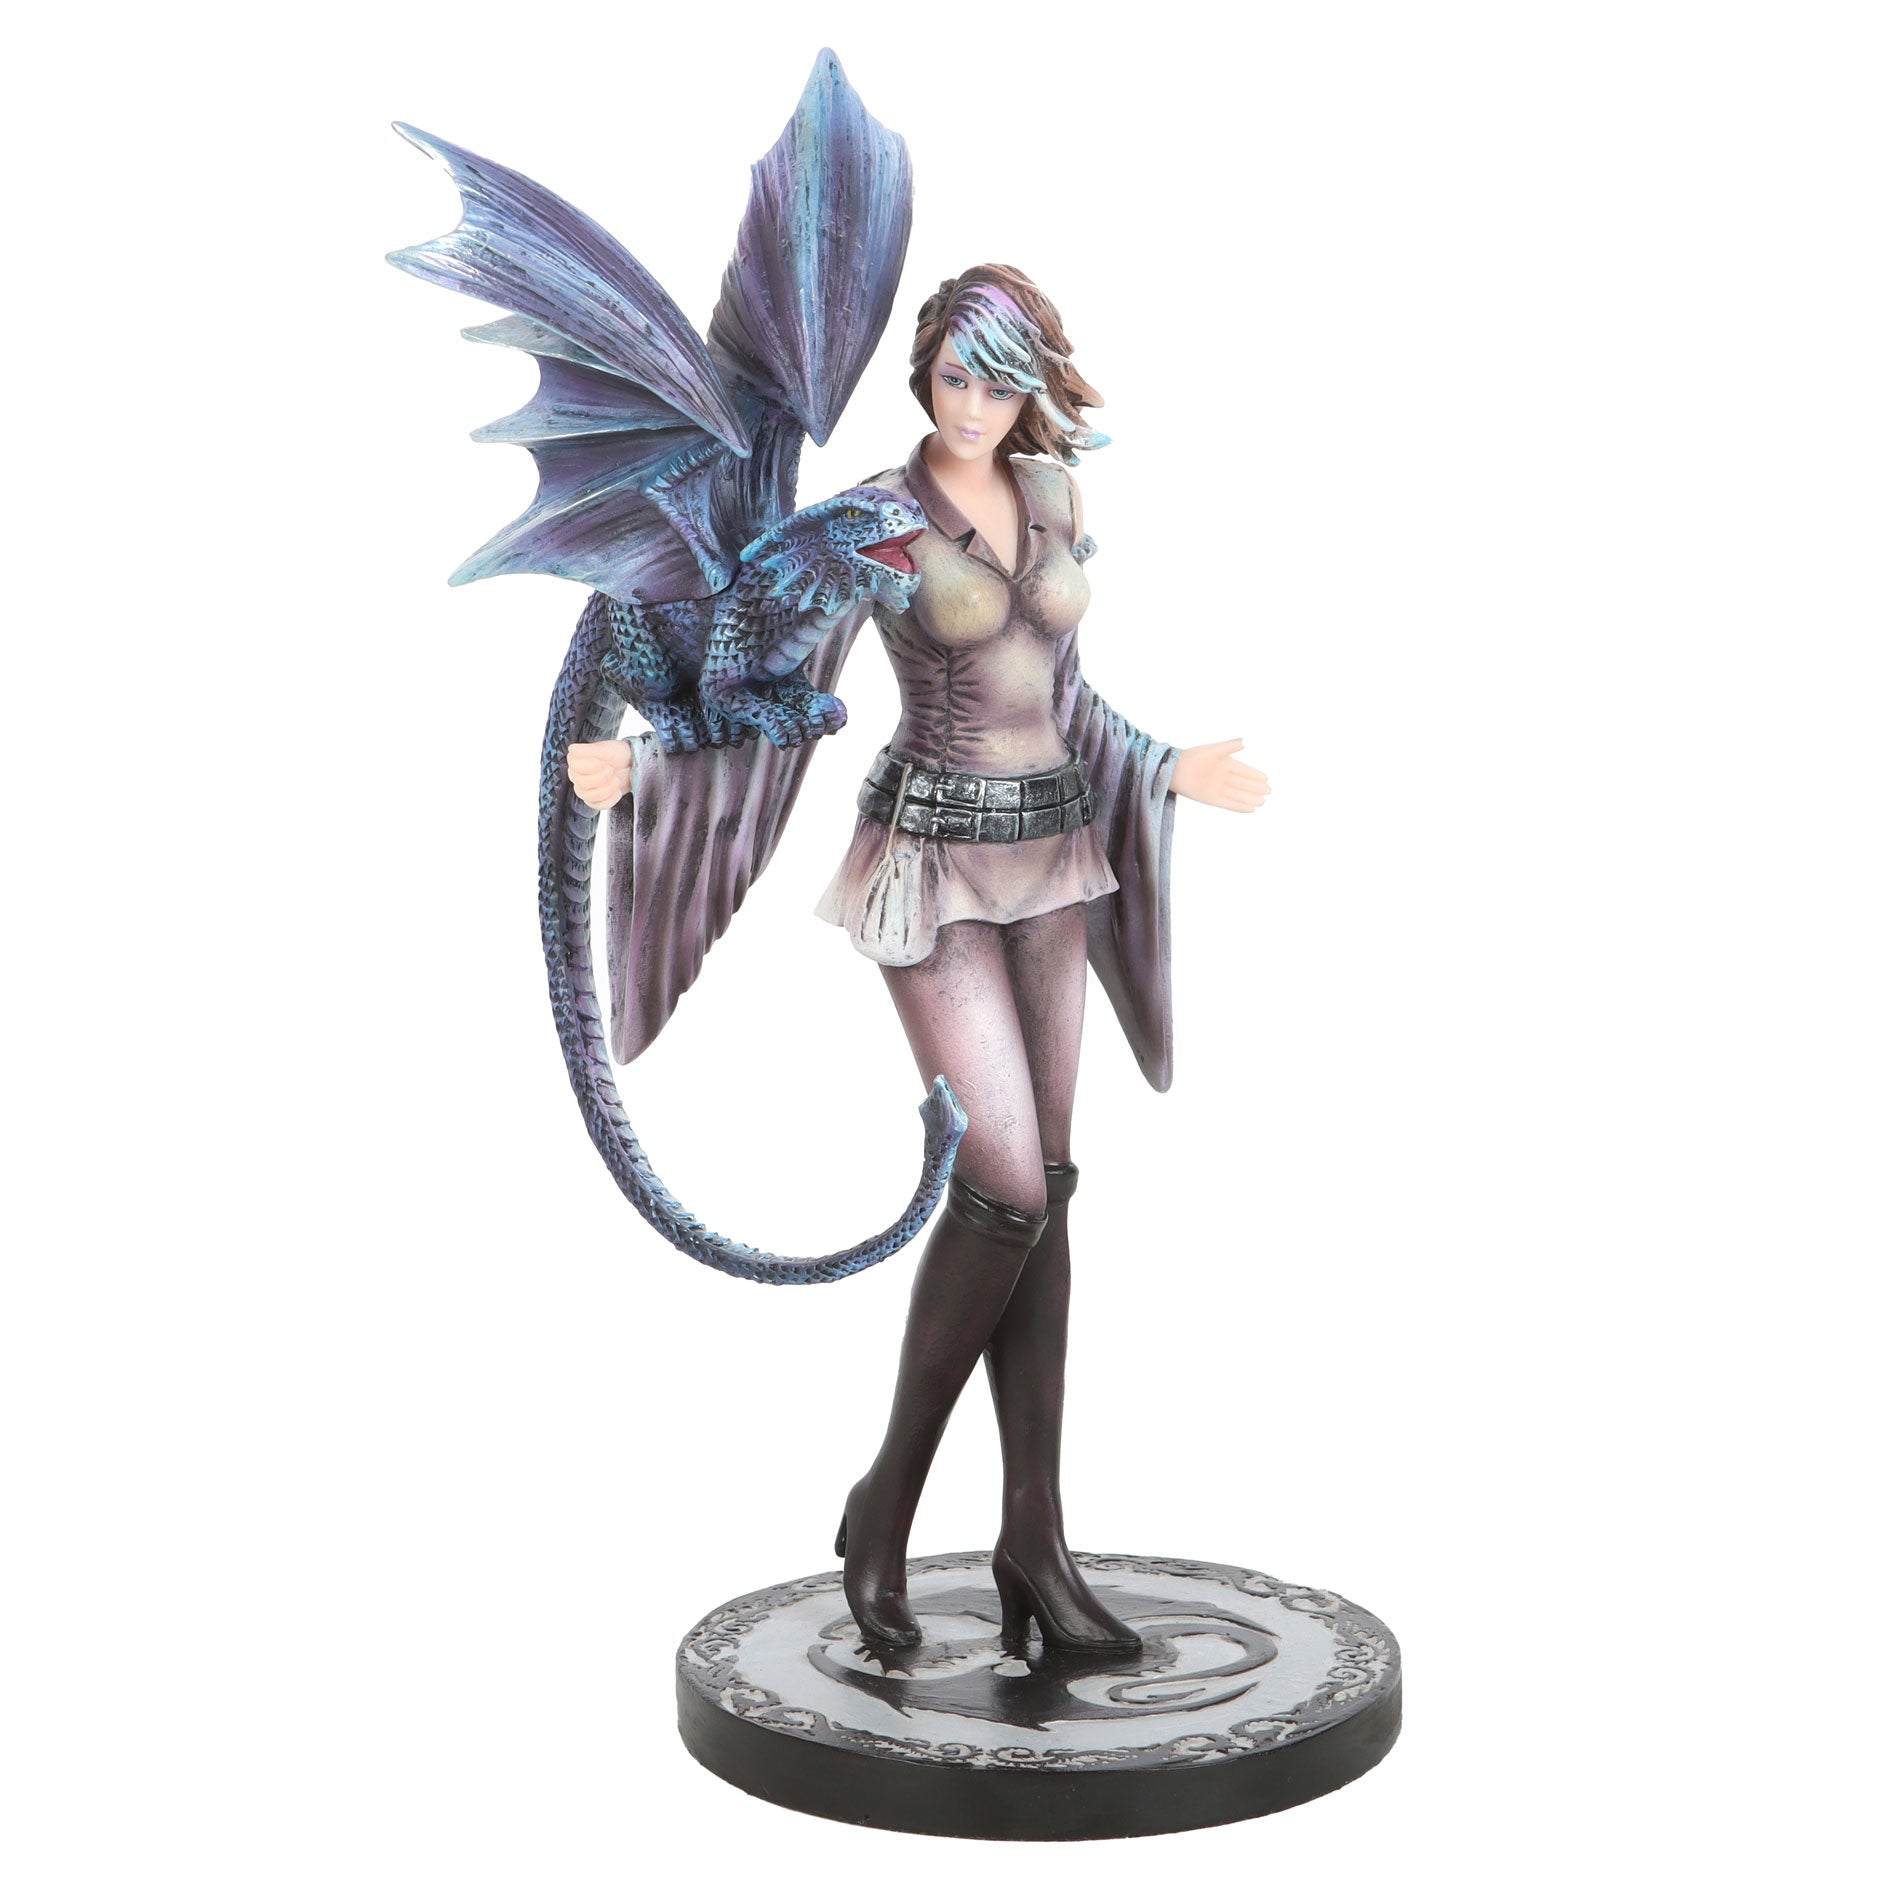 View Dragon Trainer Figurine by Anne Stokes information